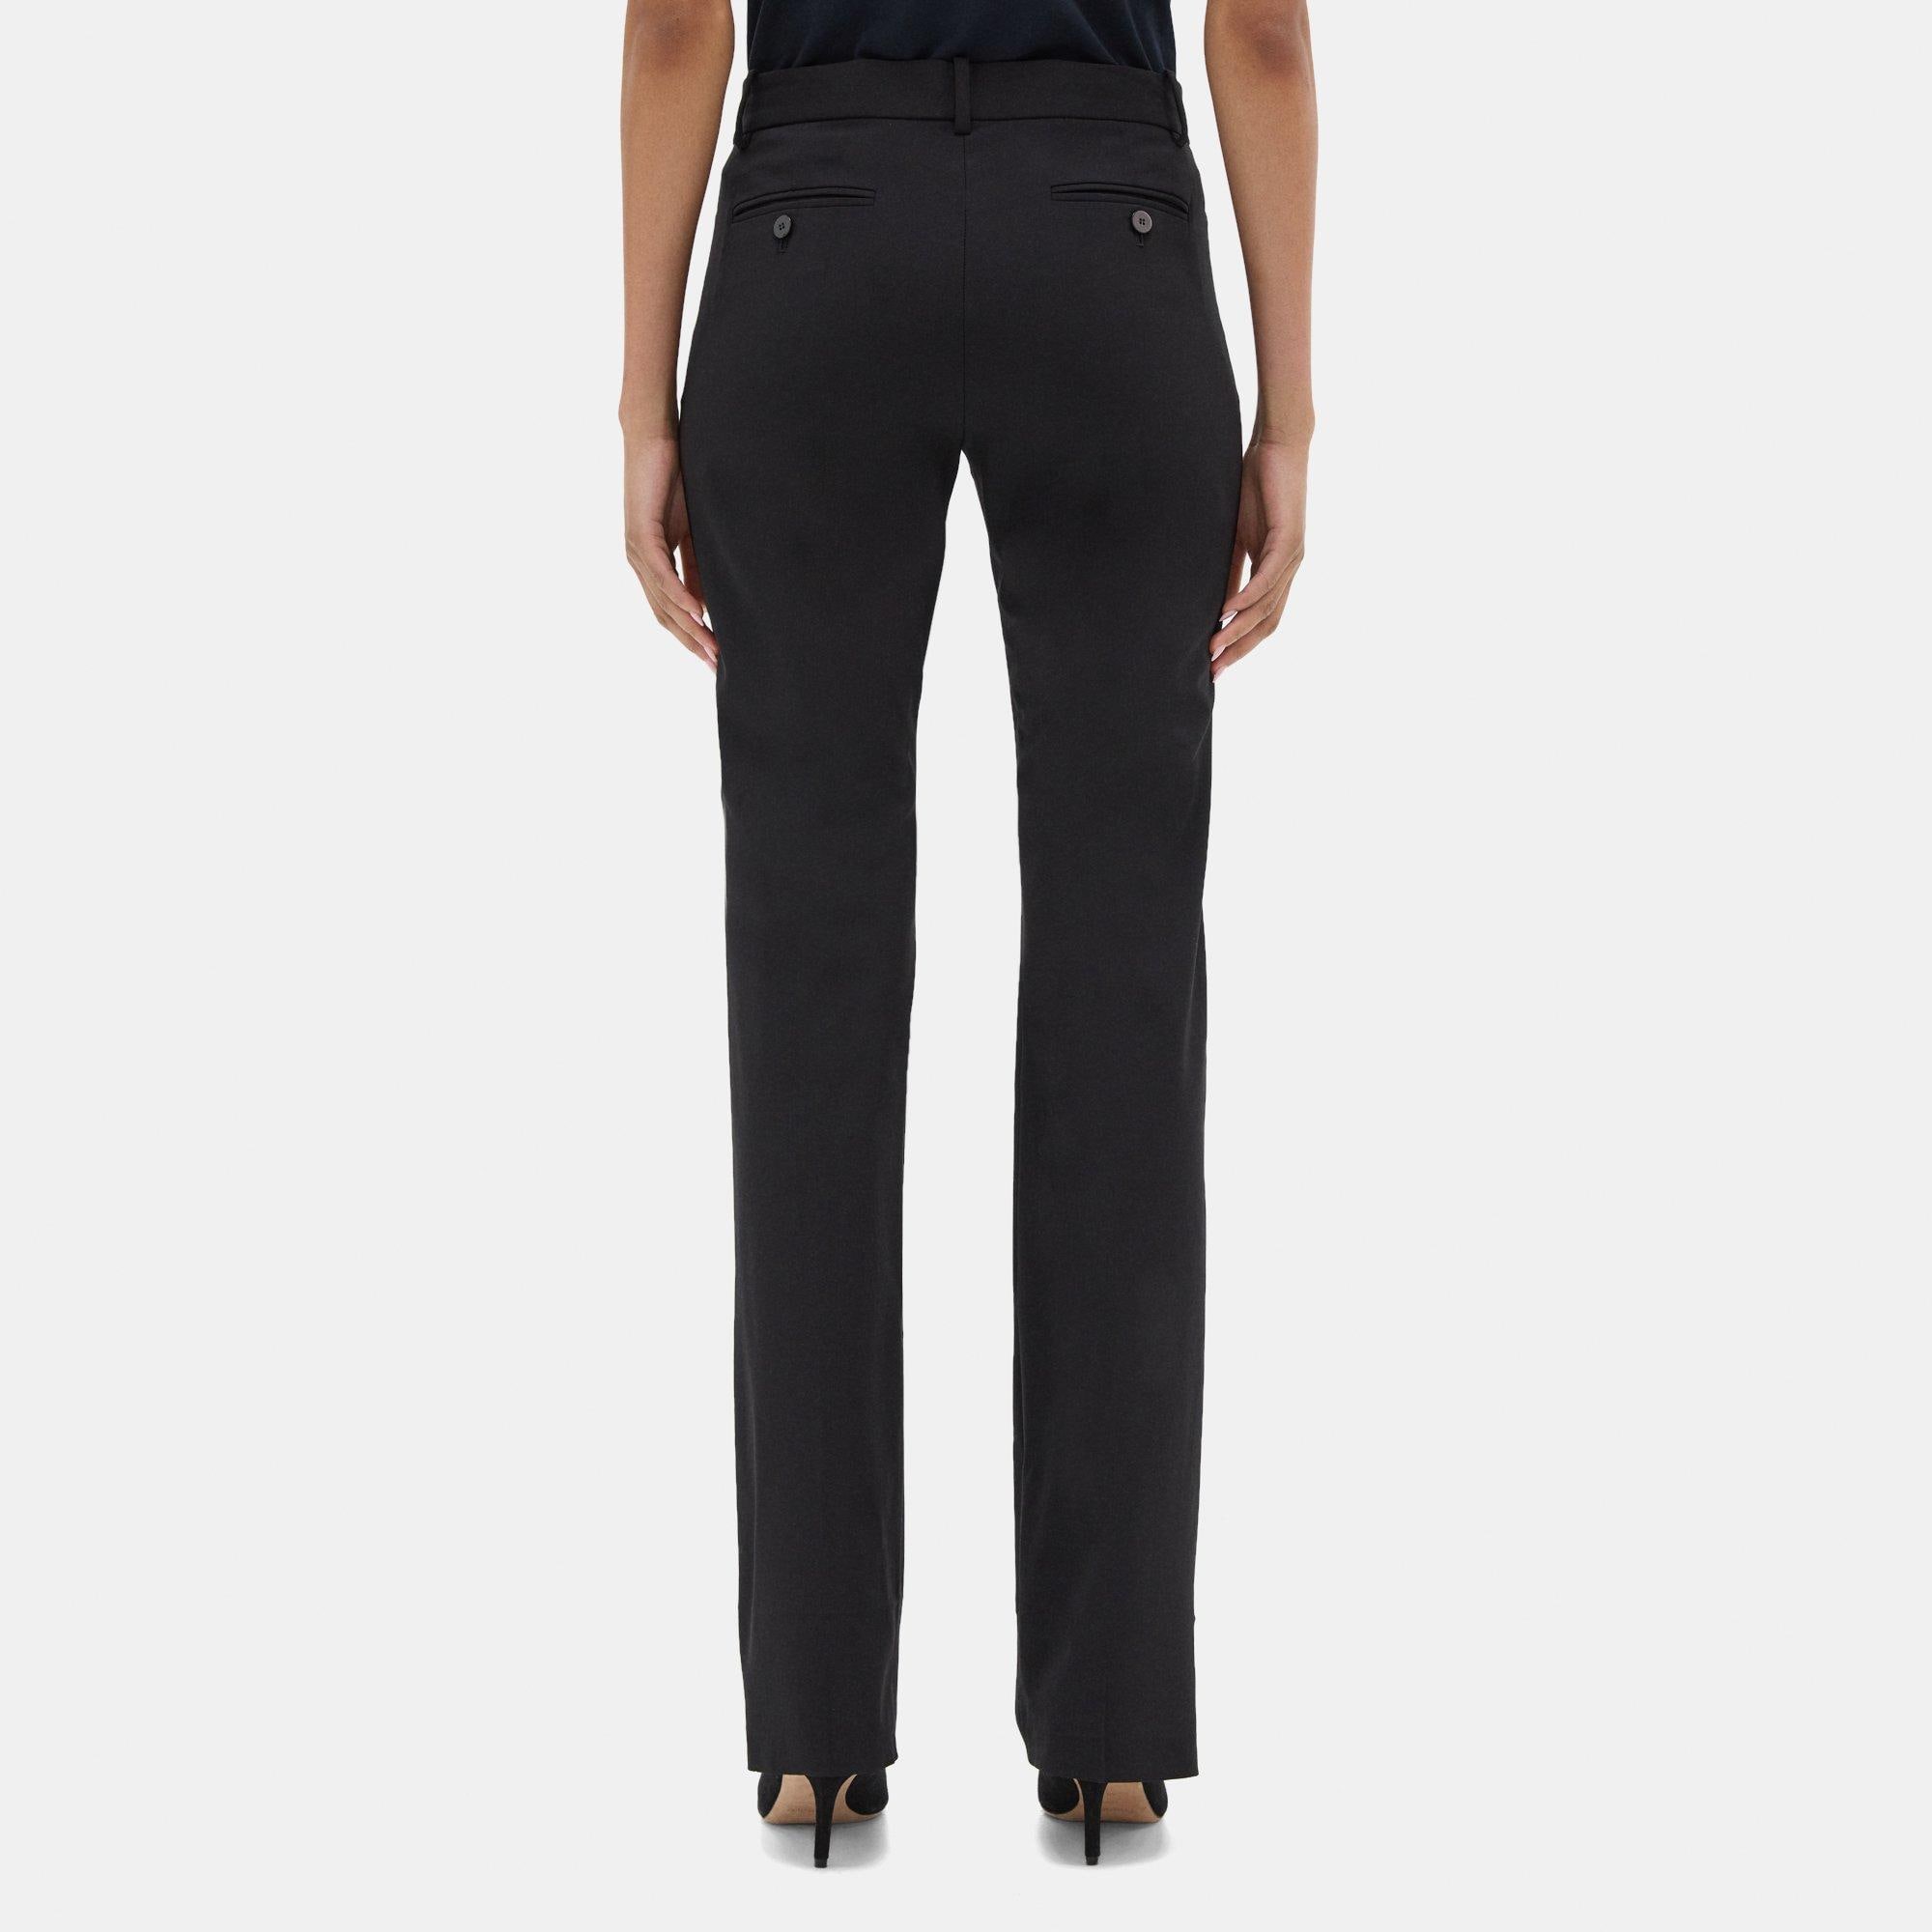 Theory Solid Black Wool Pants Size 4 - 81% off